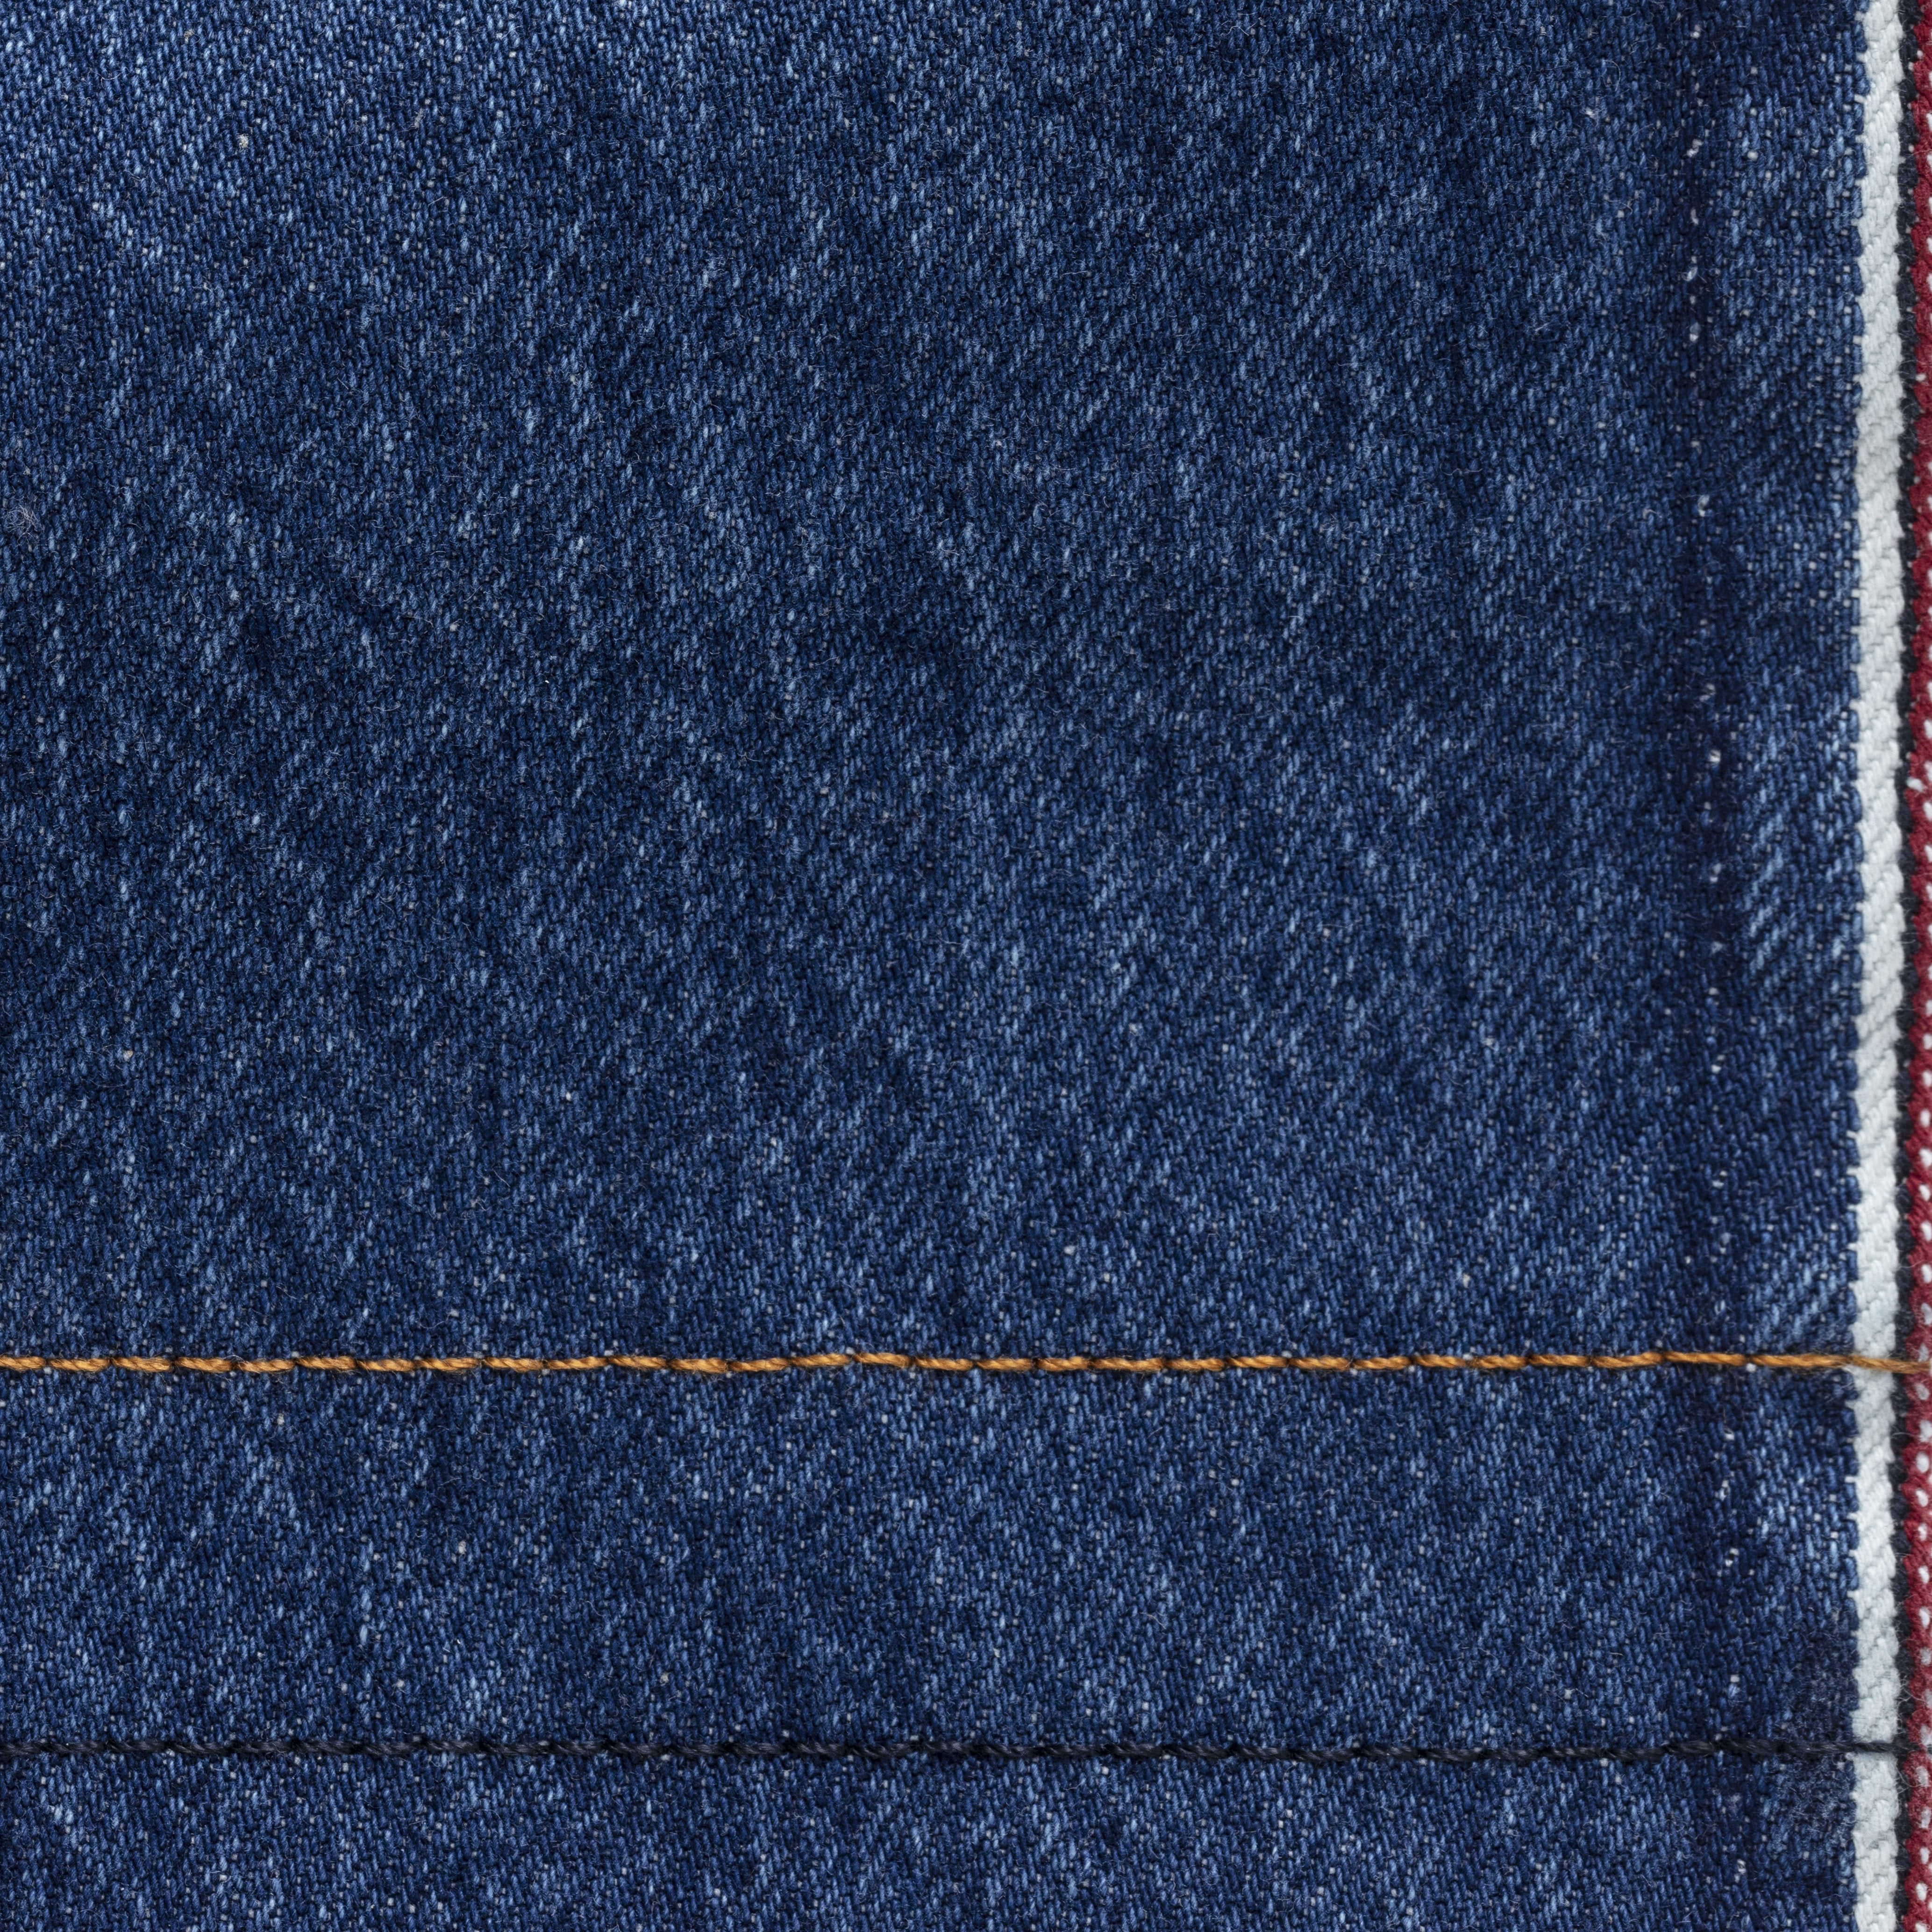 Assorted Selvedge Denim Fabric / Raven (Italy Candiani) Shop